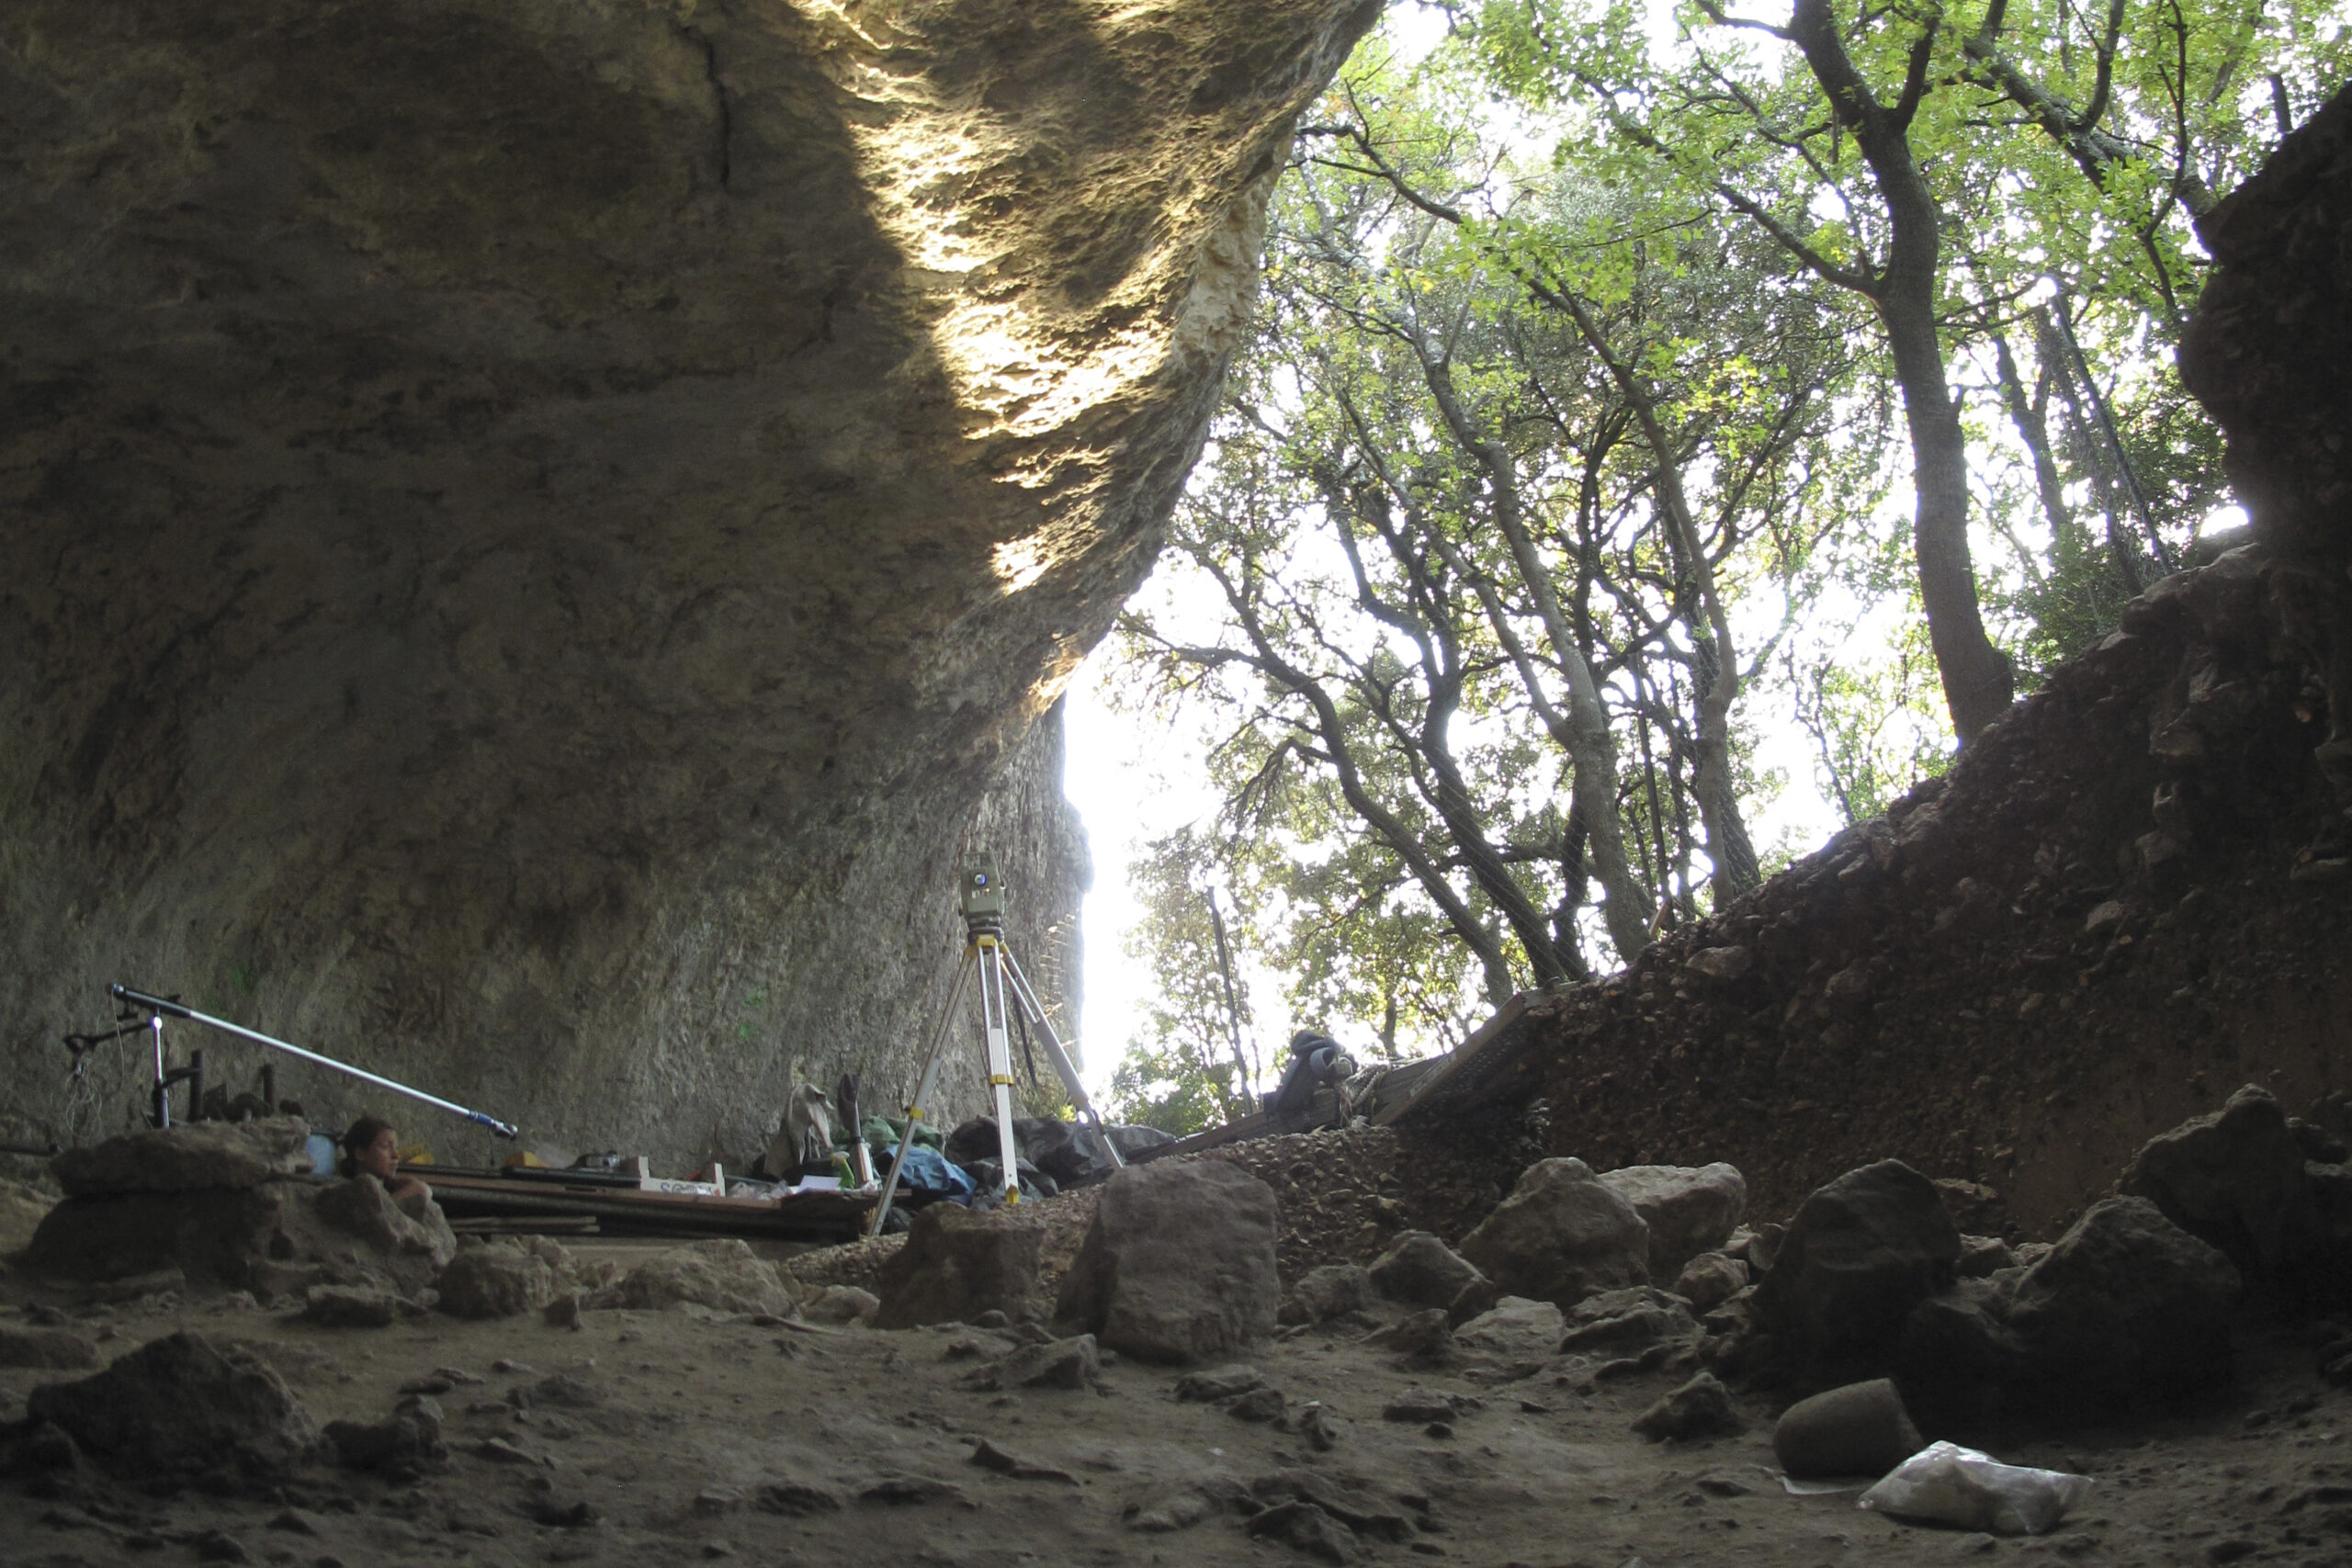 This undated photo provided by Ludovic Slimak shows scientists working at the entrance of the Mandrin cave, near Montelimar, southern France. Scientists have uncovered fossilized modern human remains and tools sandwiched between Neanderthal remains and tools in the stratigraphic record at a site in the Rhône Valley in France, suggesting occupation of the area alternated between Neanderthals and modern humans. (Ludovic Slimak via AP)